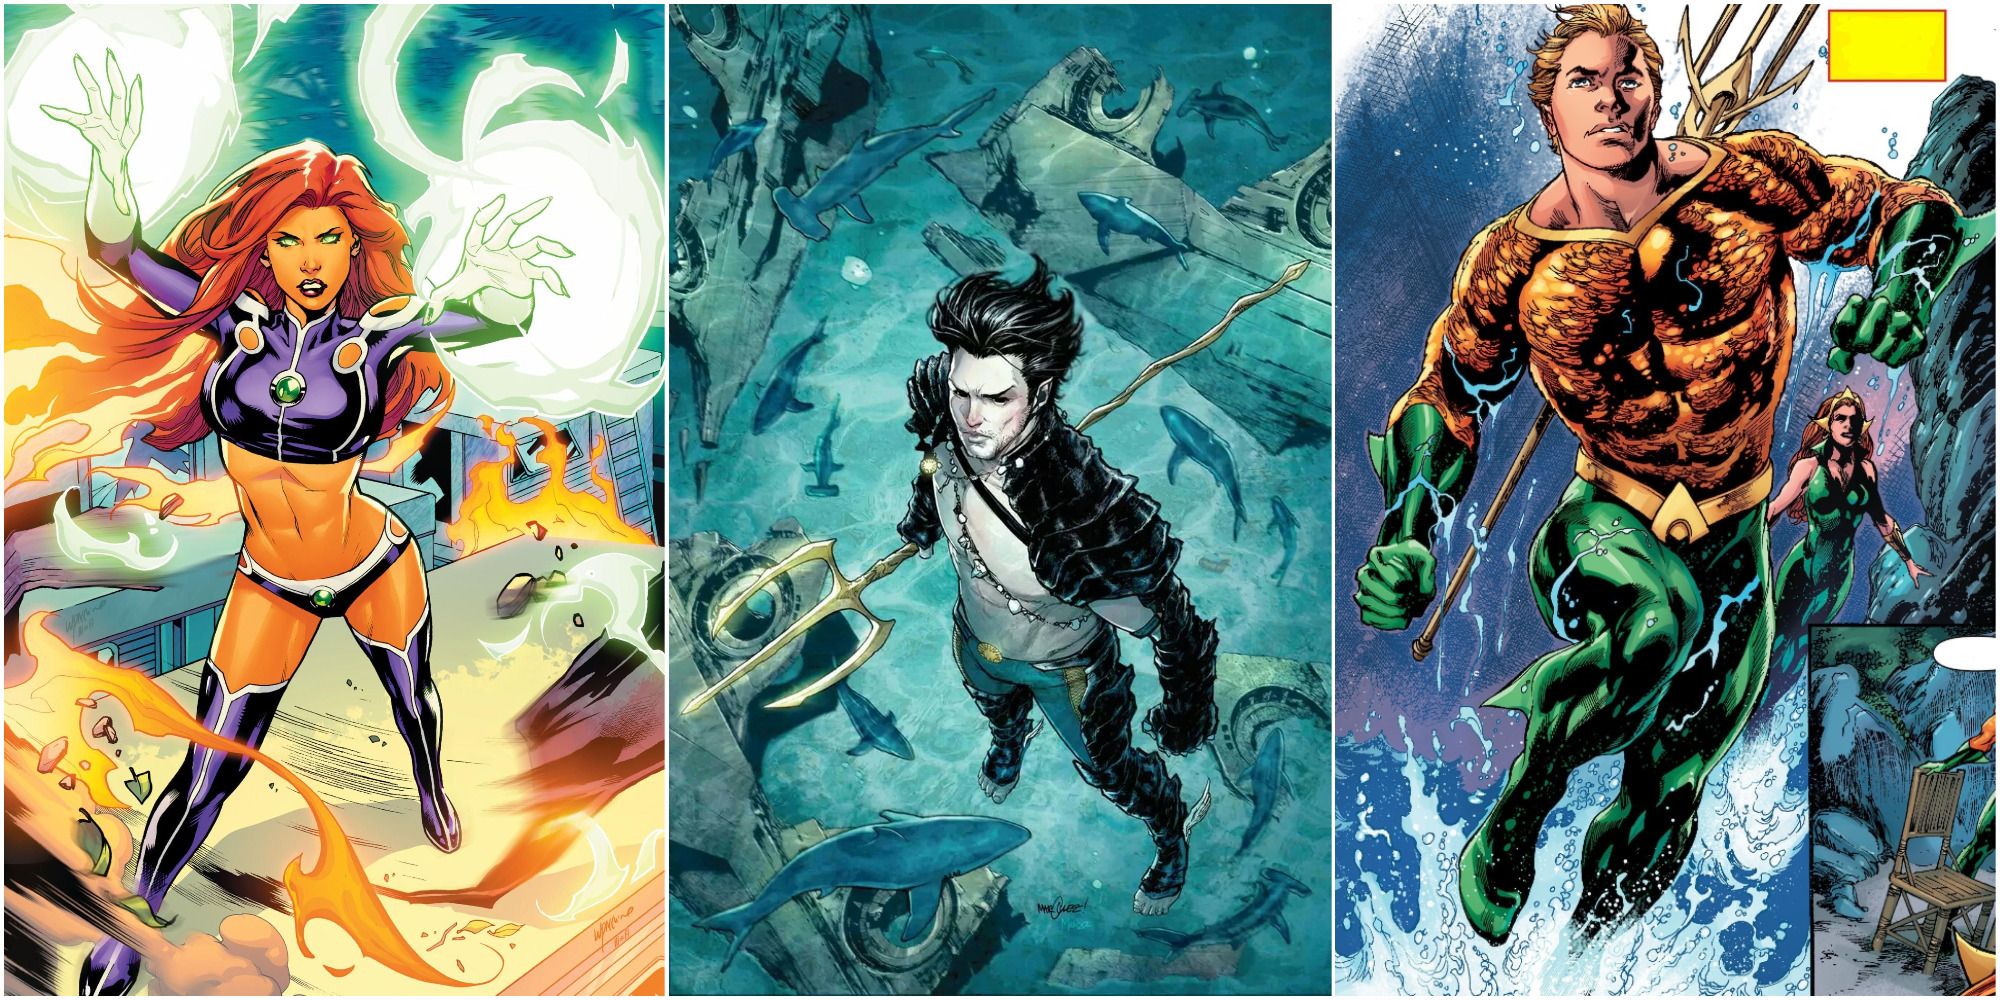 A split image of Starfire using her powers, Namor standing ready under the water, and Aquaman leaping from the ocean